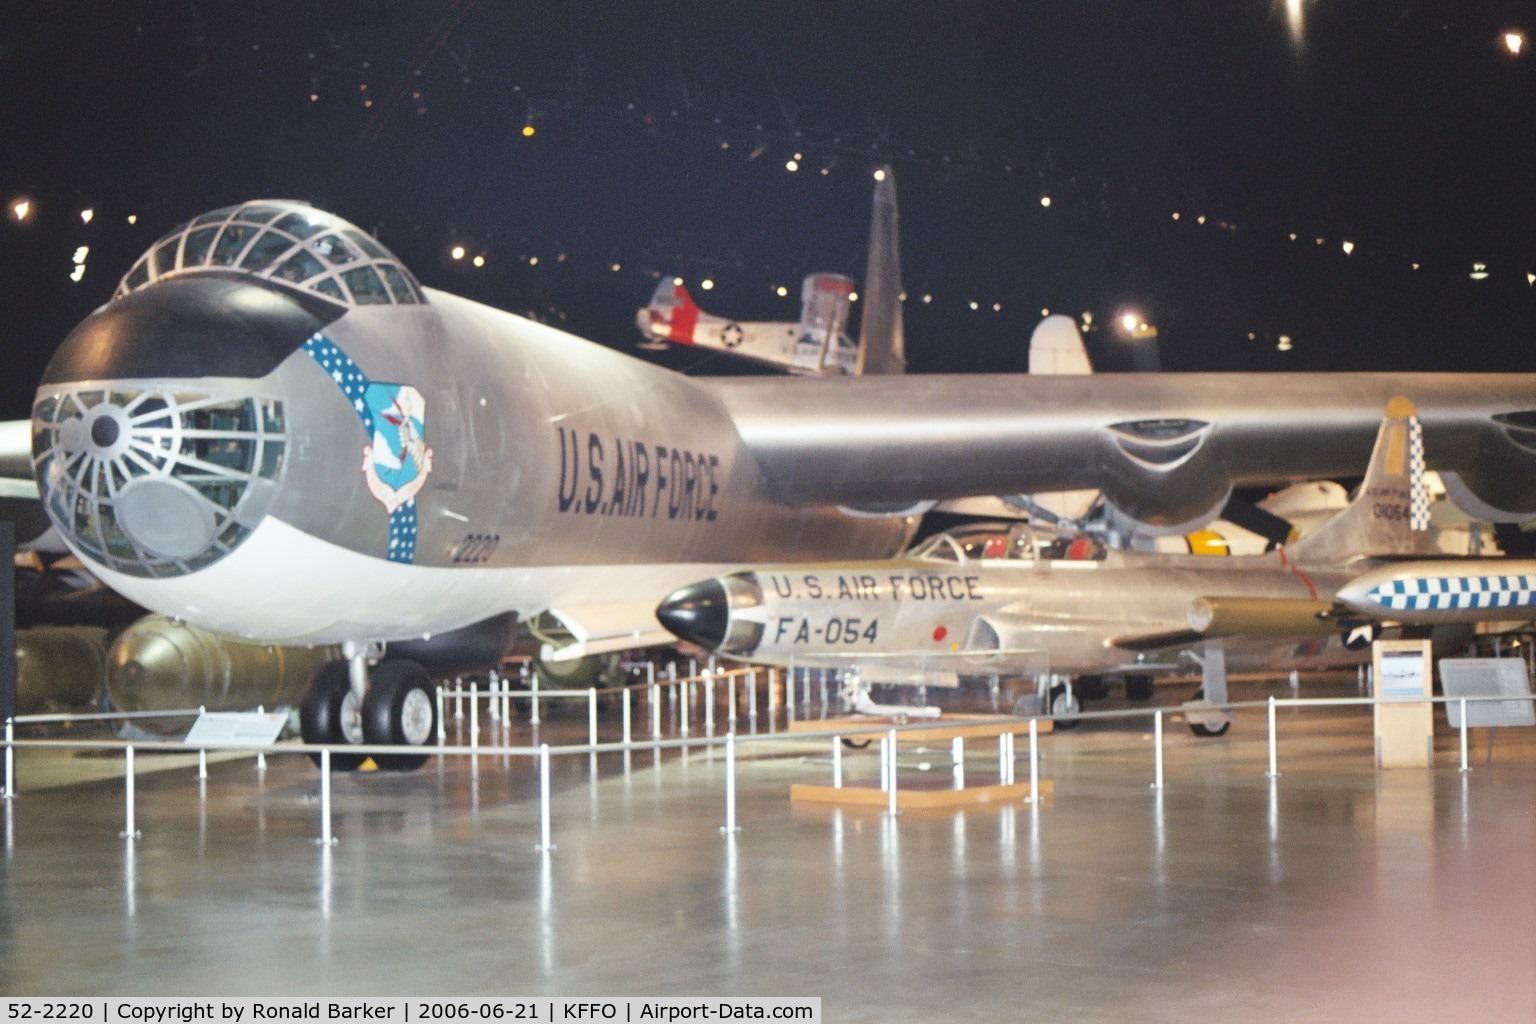 52-2220, 1952 Consolidated B-36J-1-CF Peacemaker C/N 361, National Museum of the Air Force